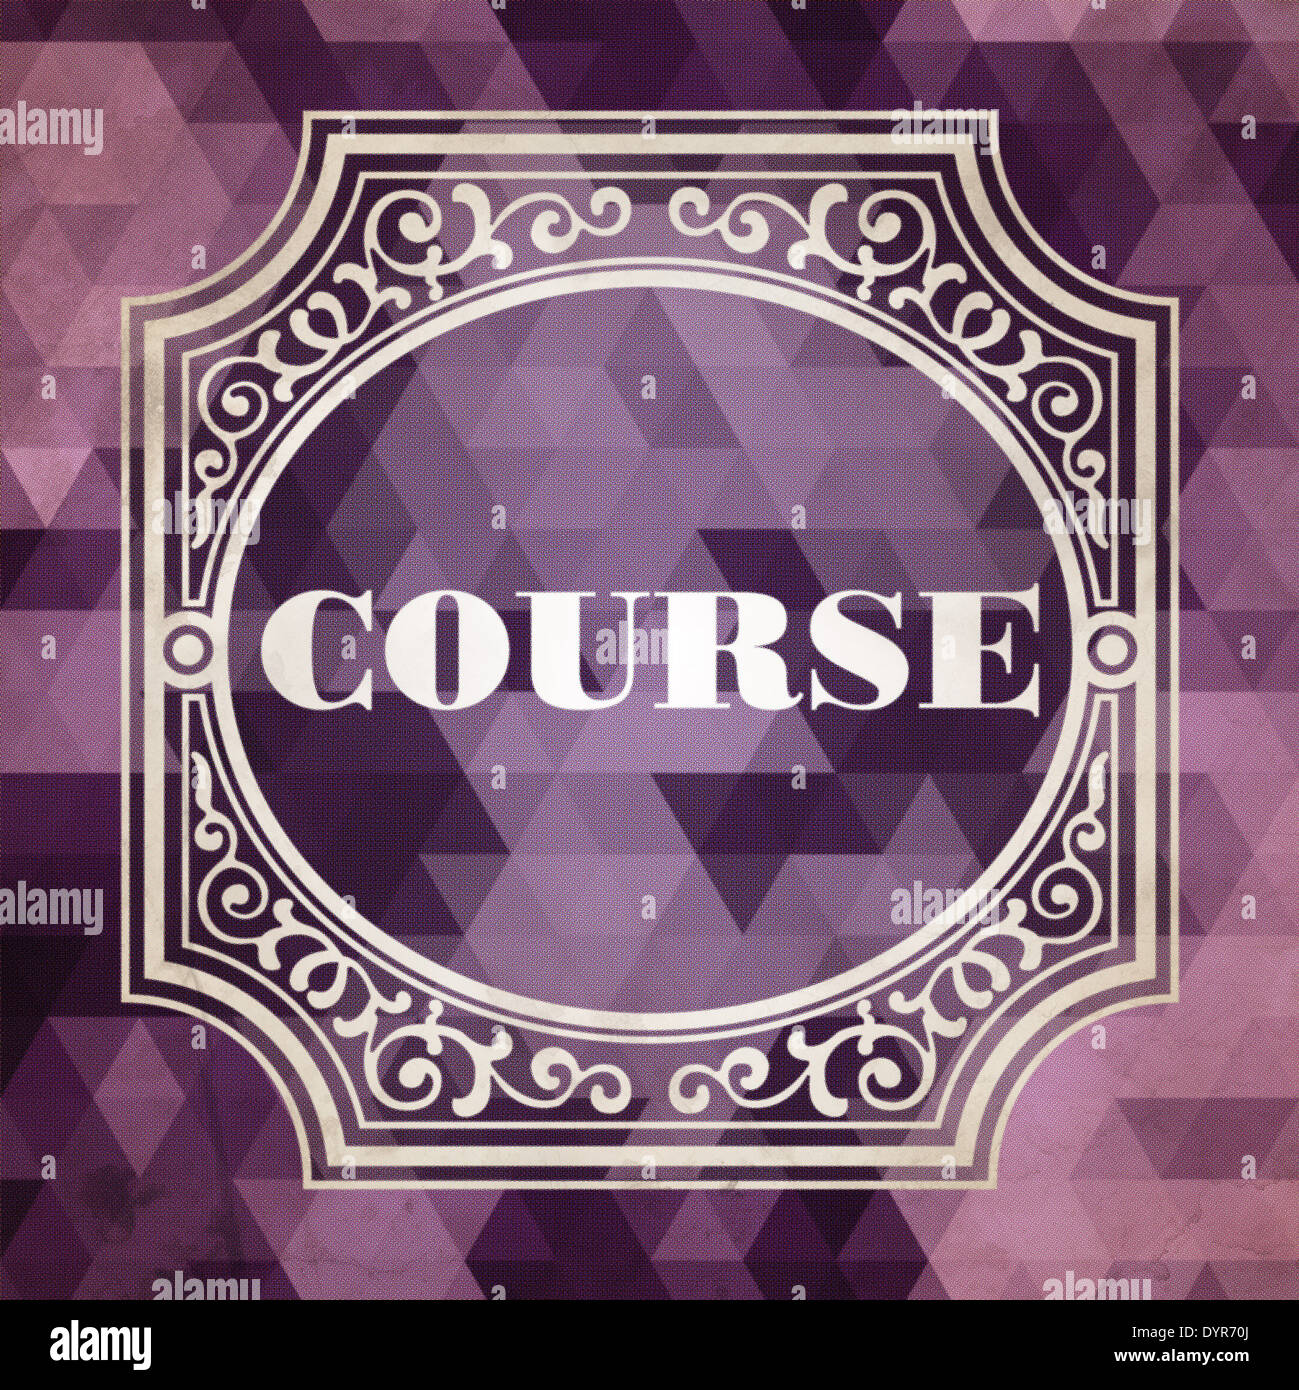 Course Concept. Vintage design. Purple Background made of Triangles. Stock Photo